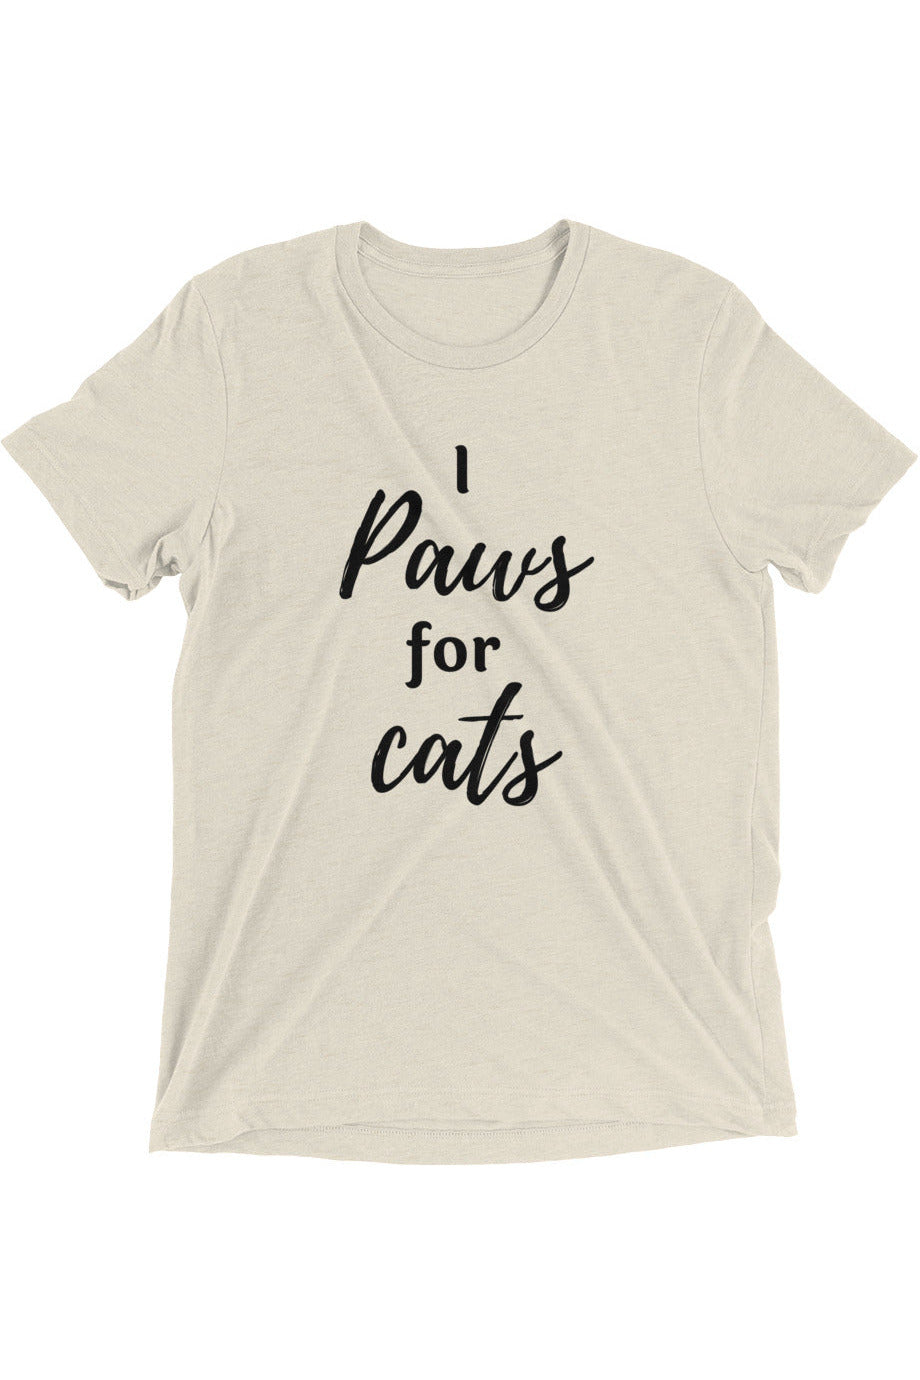 "Paws For Cats" - Short sleeve t-shirt